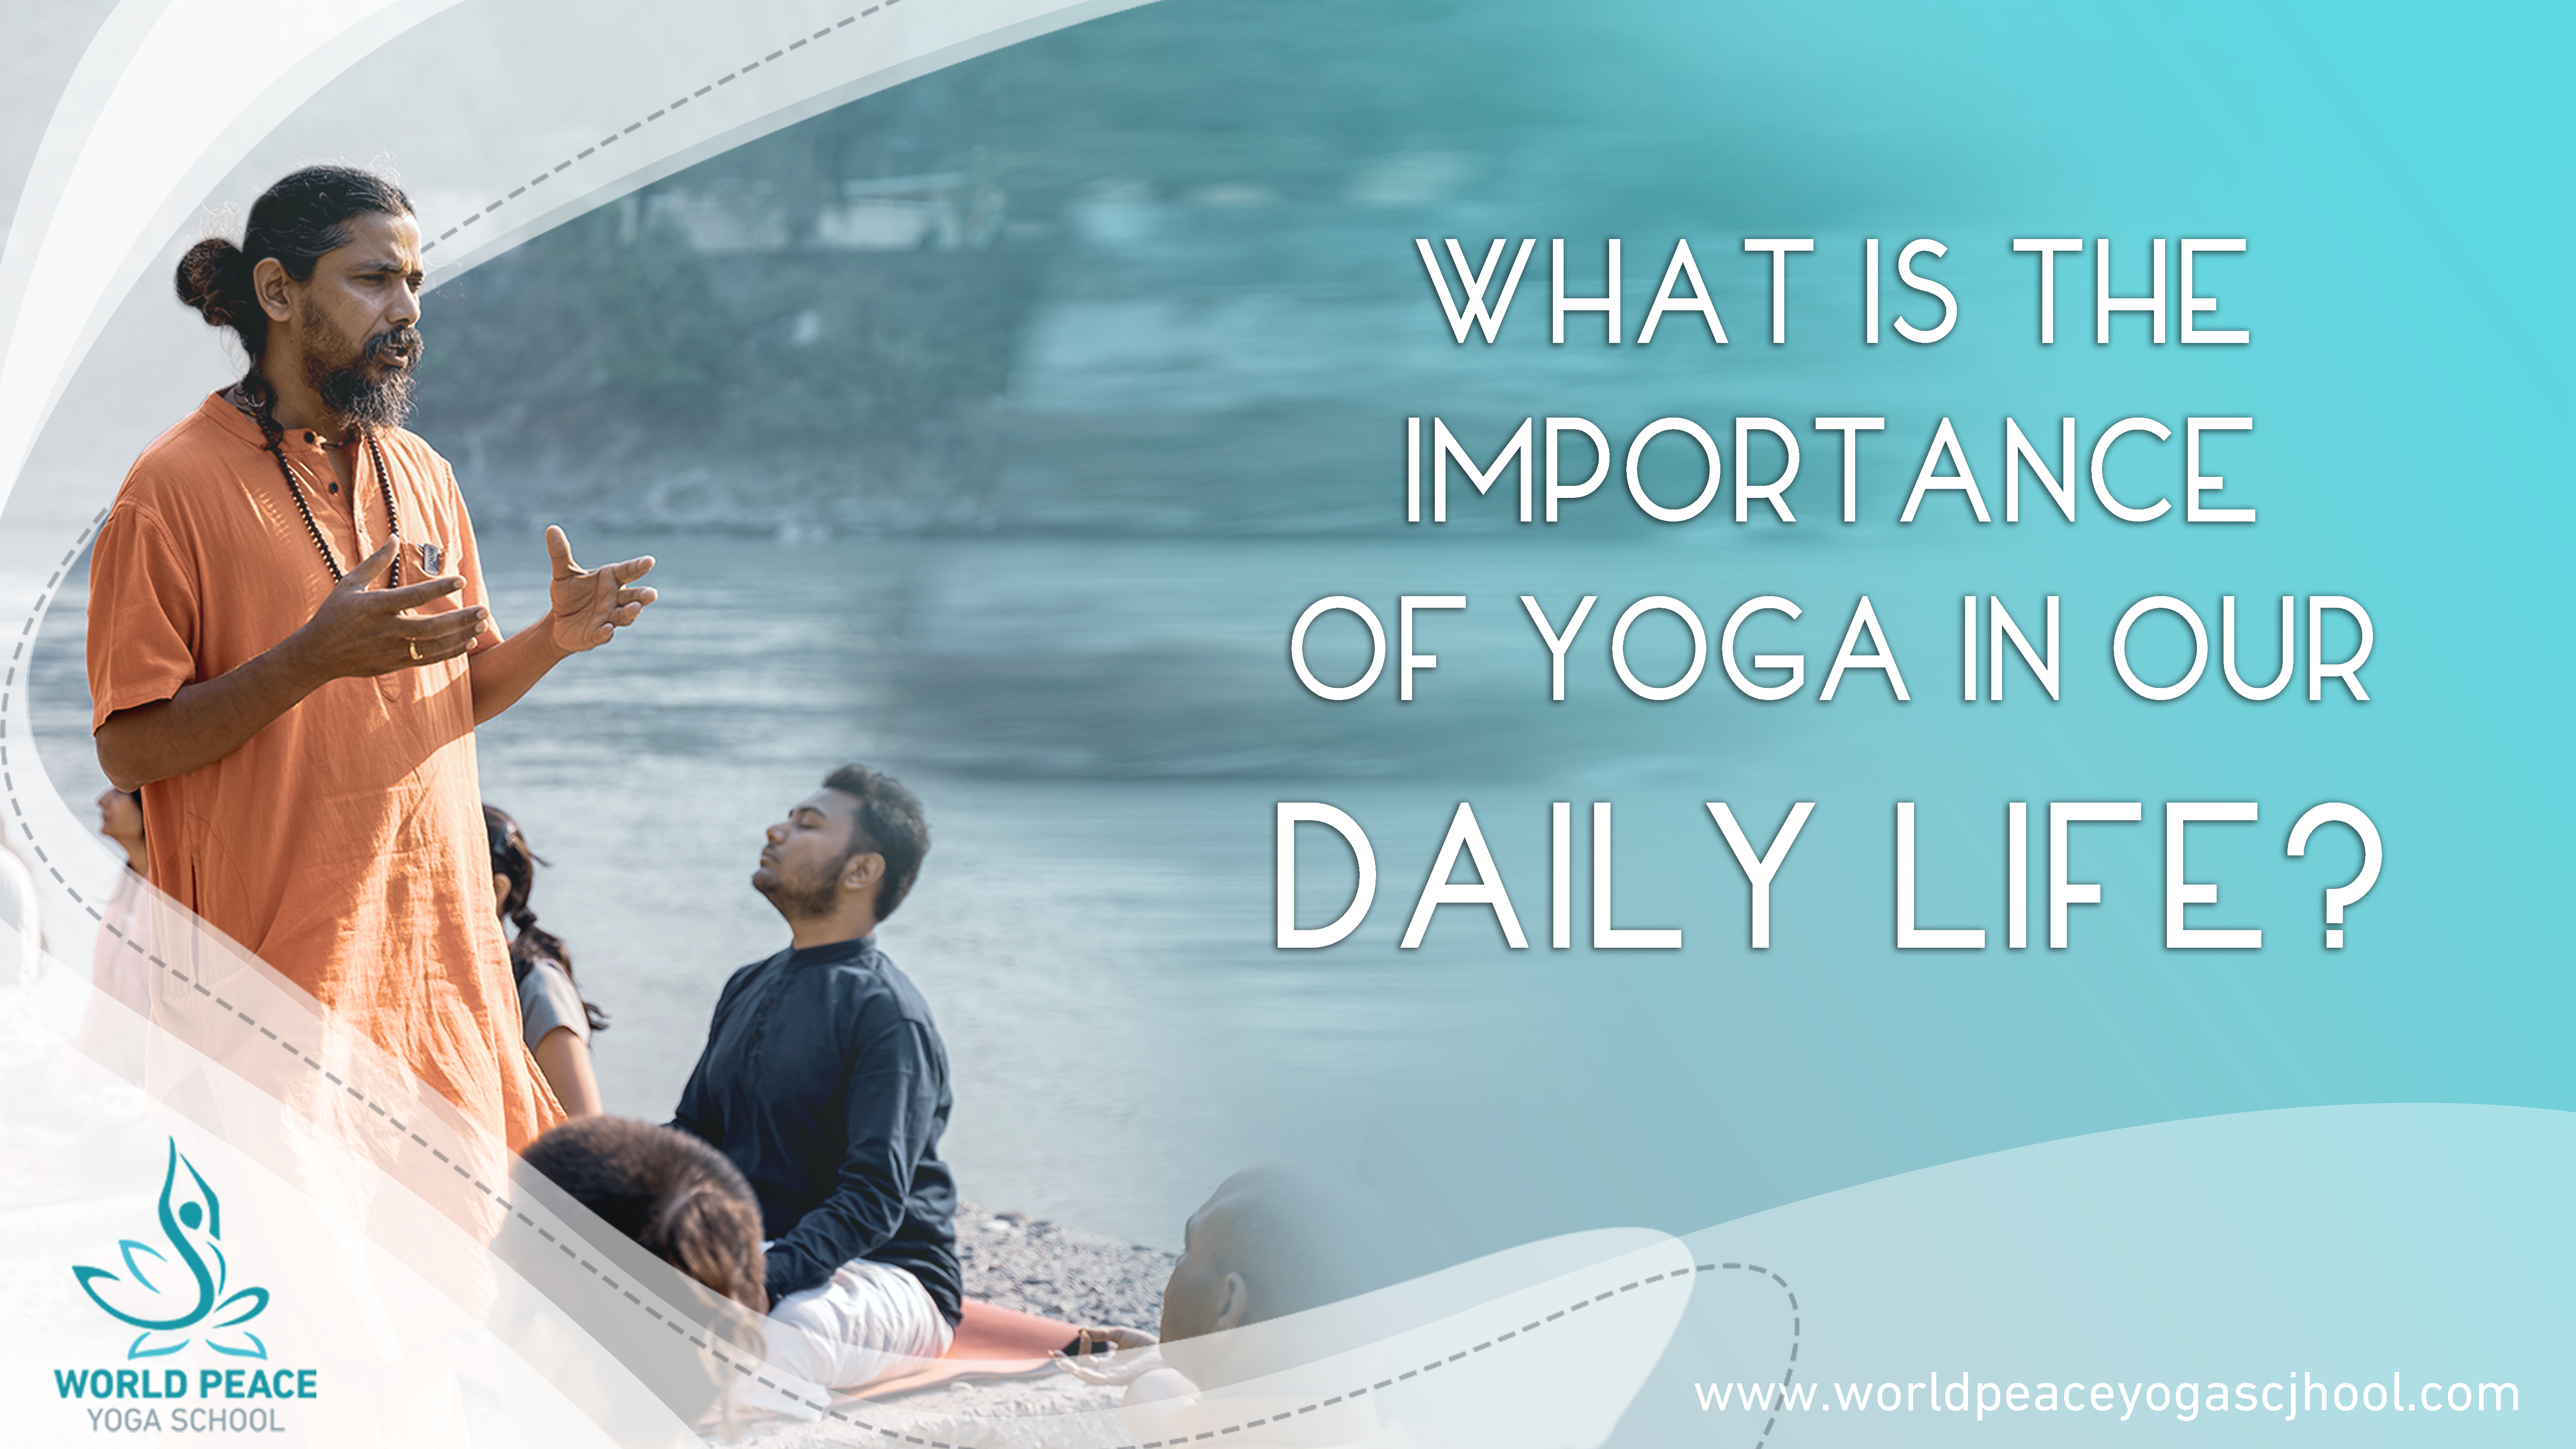 The Importance Of Yoga In Our Daily Life?